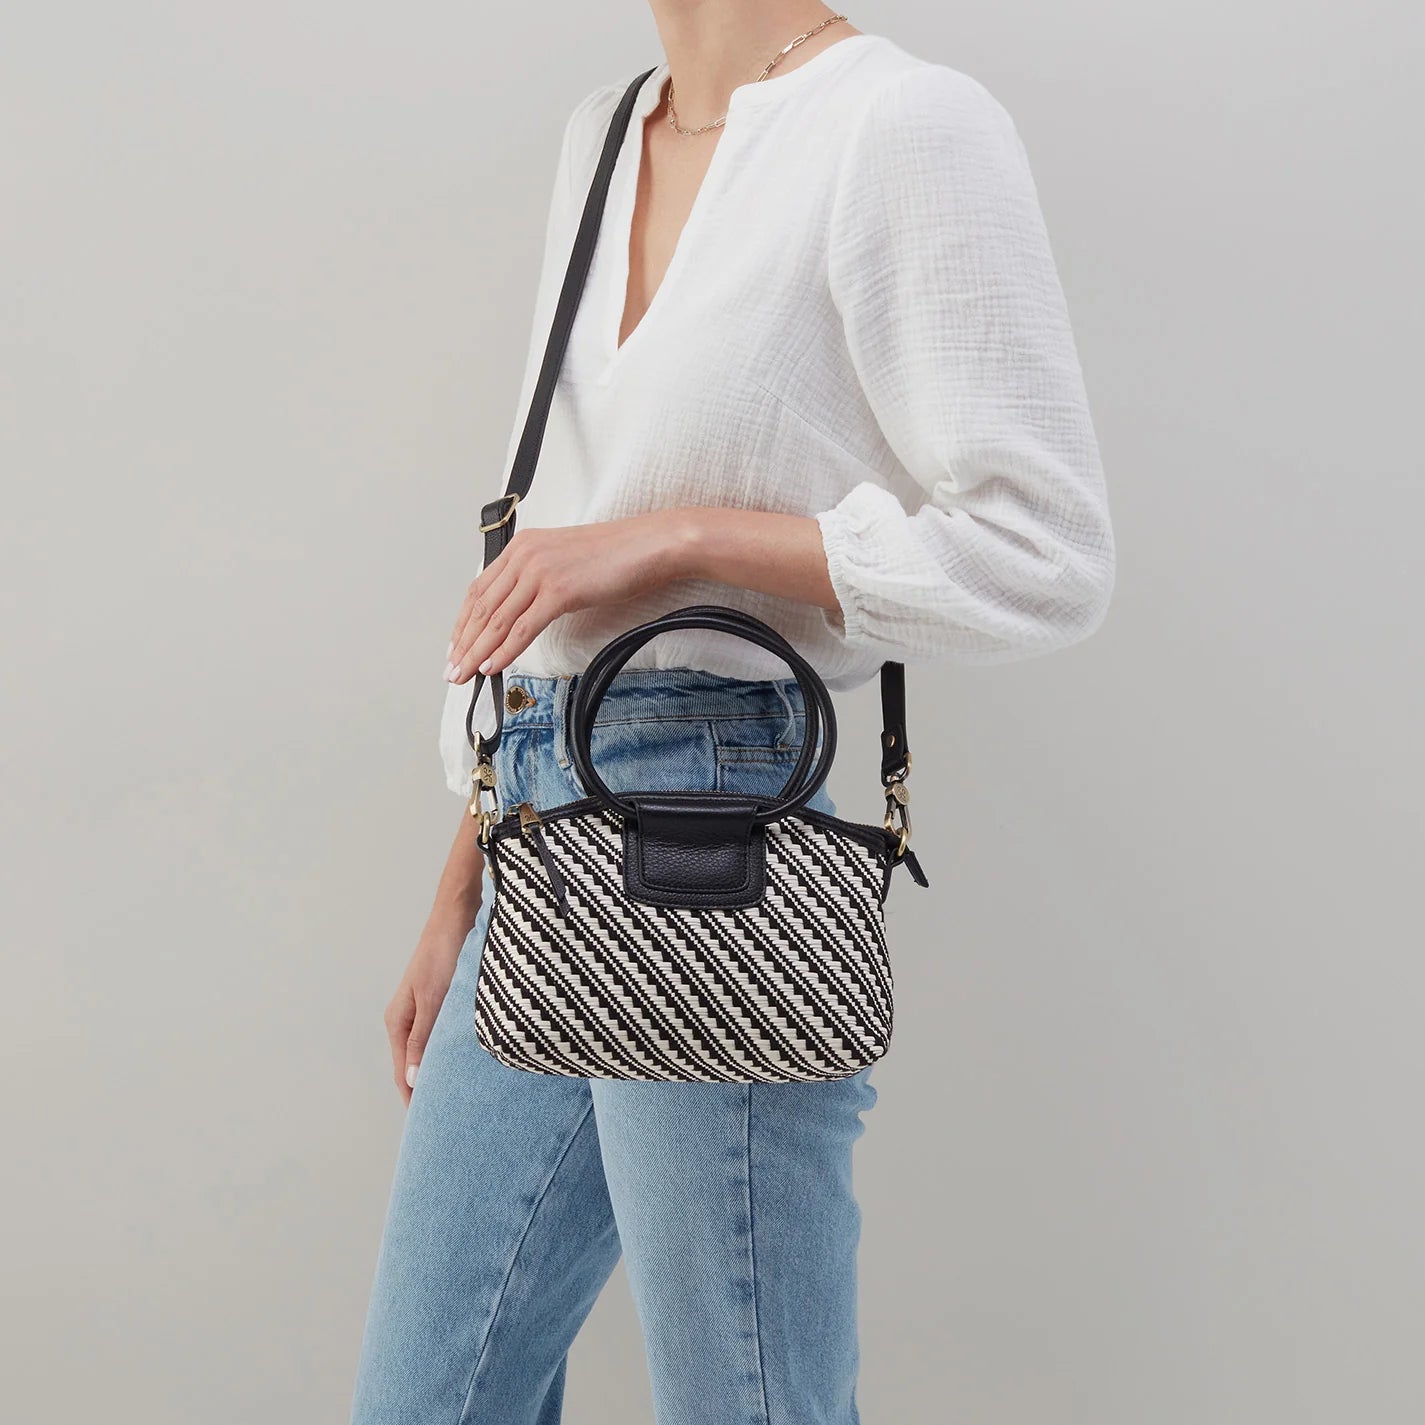 Introducing Sheila a small crossbody bag designed with our